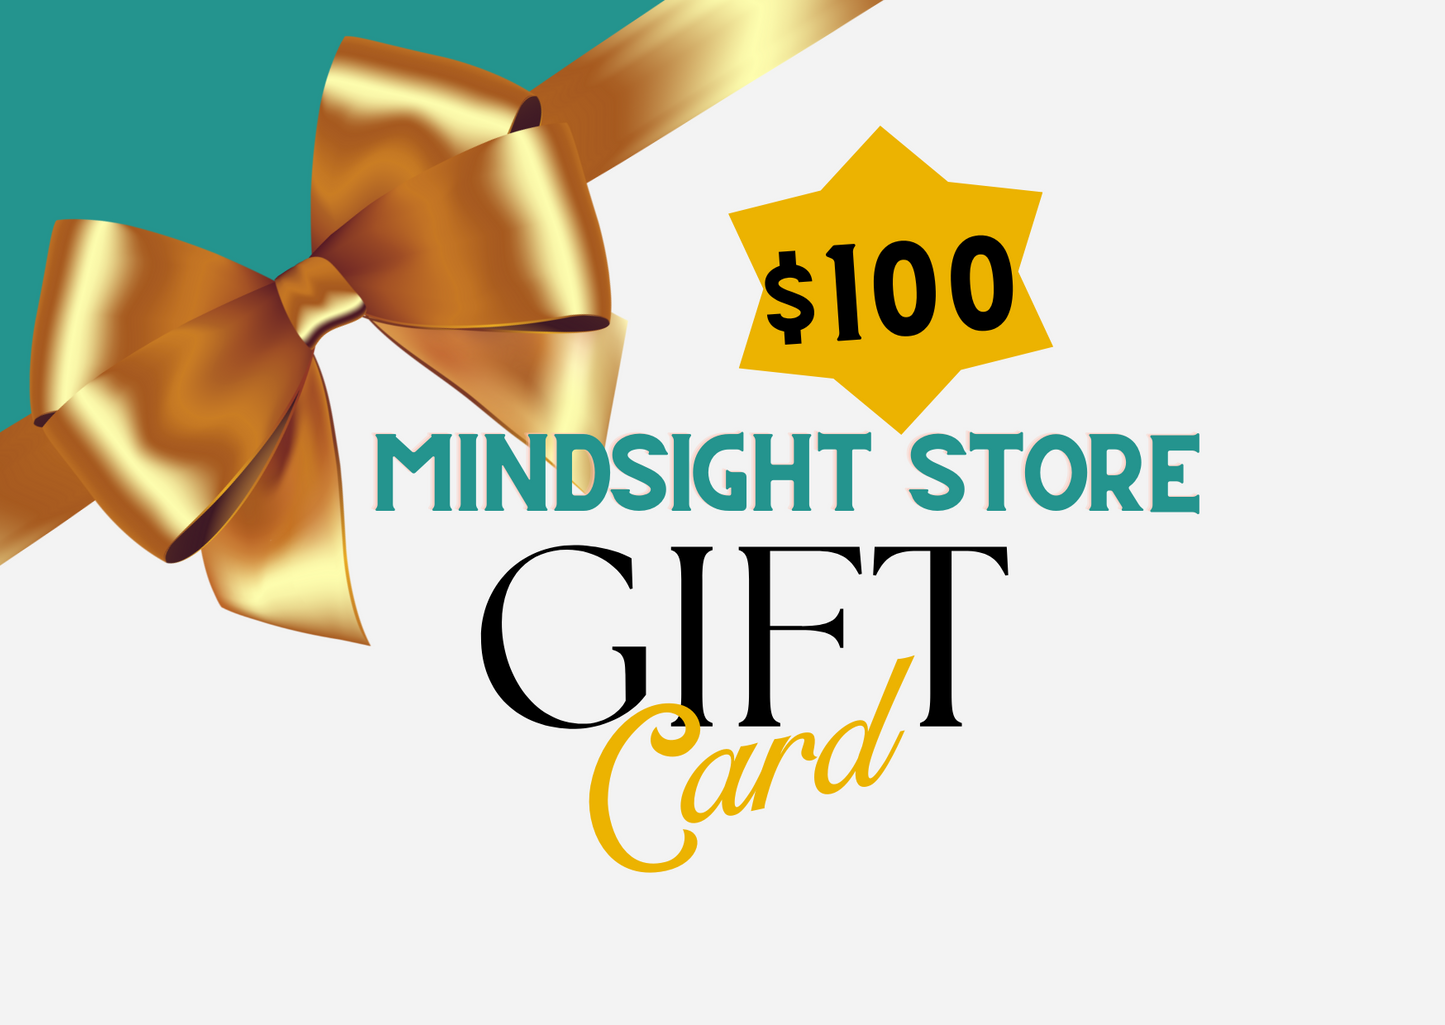 Mindsight Store Gift Card